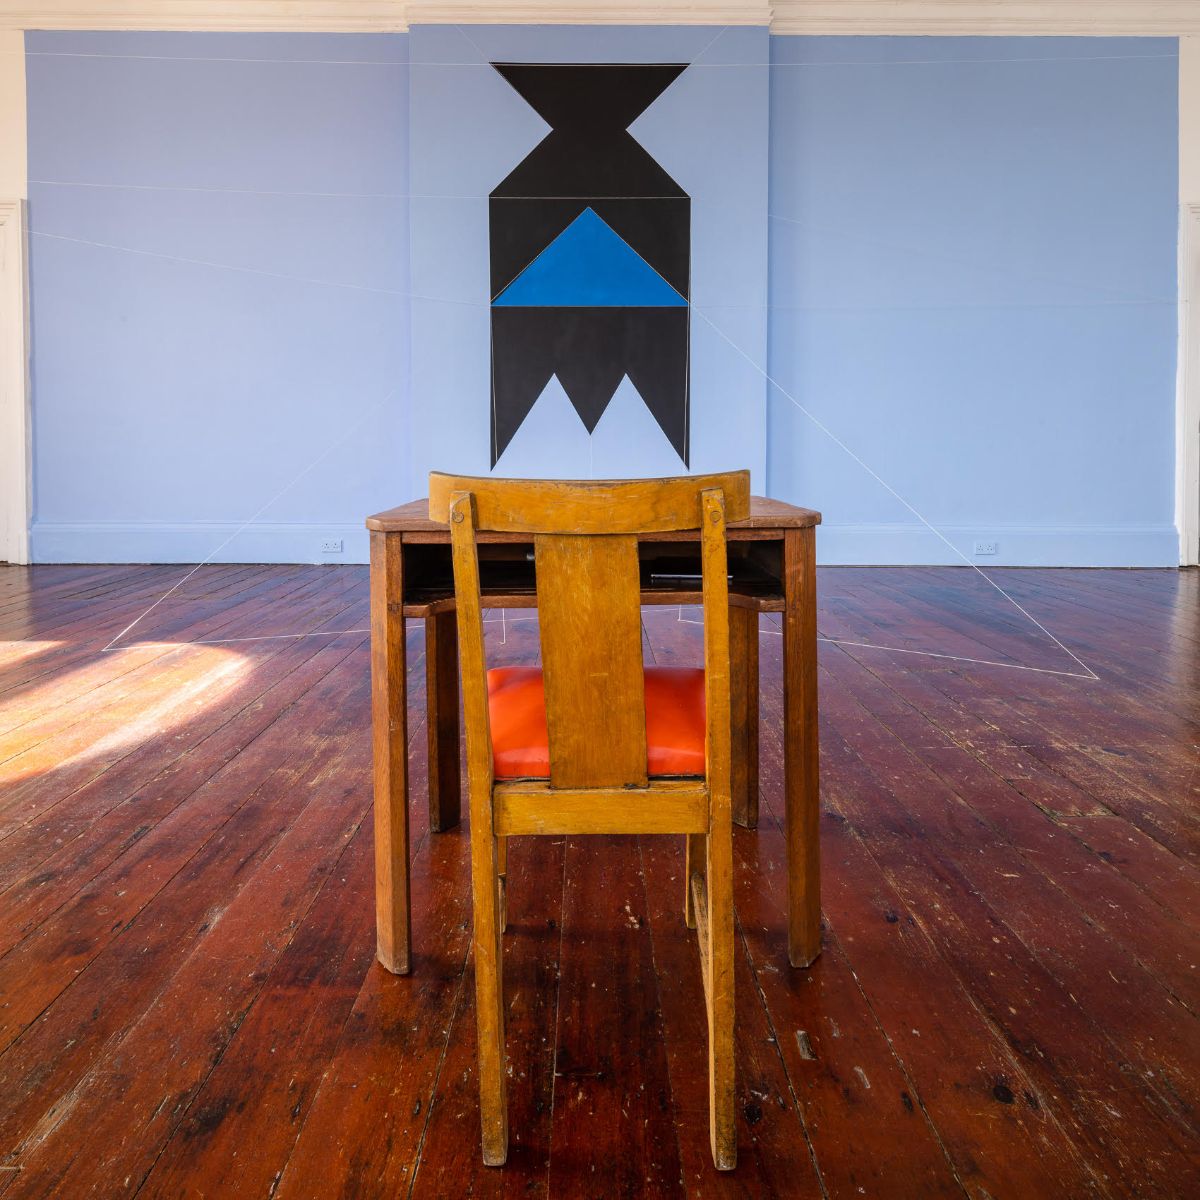 View of Patrick Ireland, aka Brian O'Doherty, HCE Redux, 2004 (remade 2023), SIRIUS, 2023. Paint, cord, table, chair, typed paper. Dimensions variable. Courtesy of The Estate of Brian O’Doherty. Photograph: John Beasley | SIRIUS Summer School: Brian O’Doherty: Reading Time | Tuesday 6 June – Saturday 10 June 2023 | SIRIUS